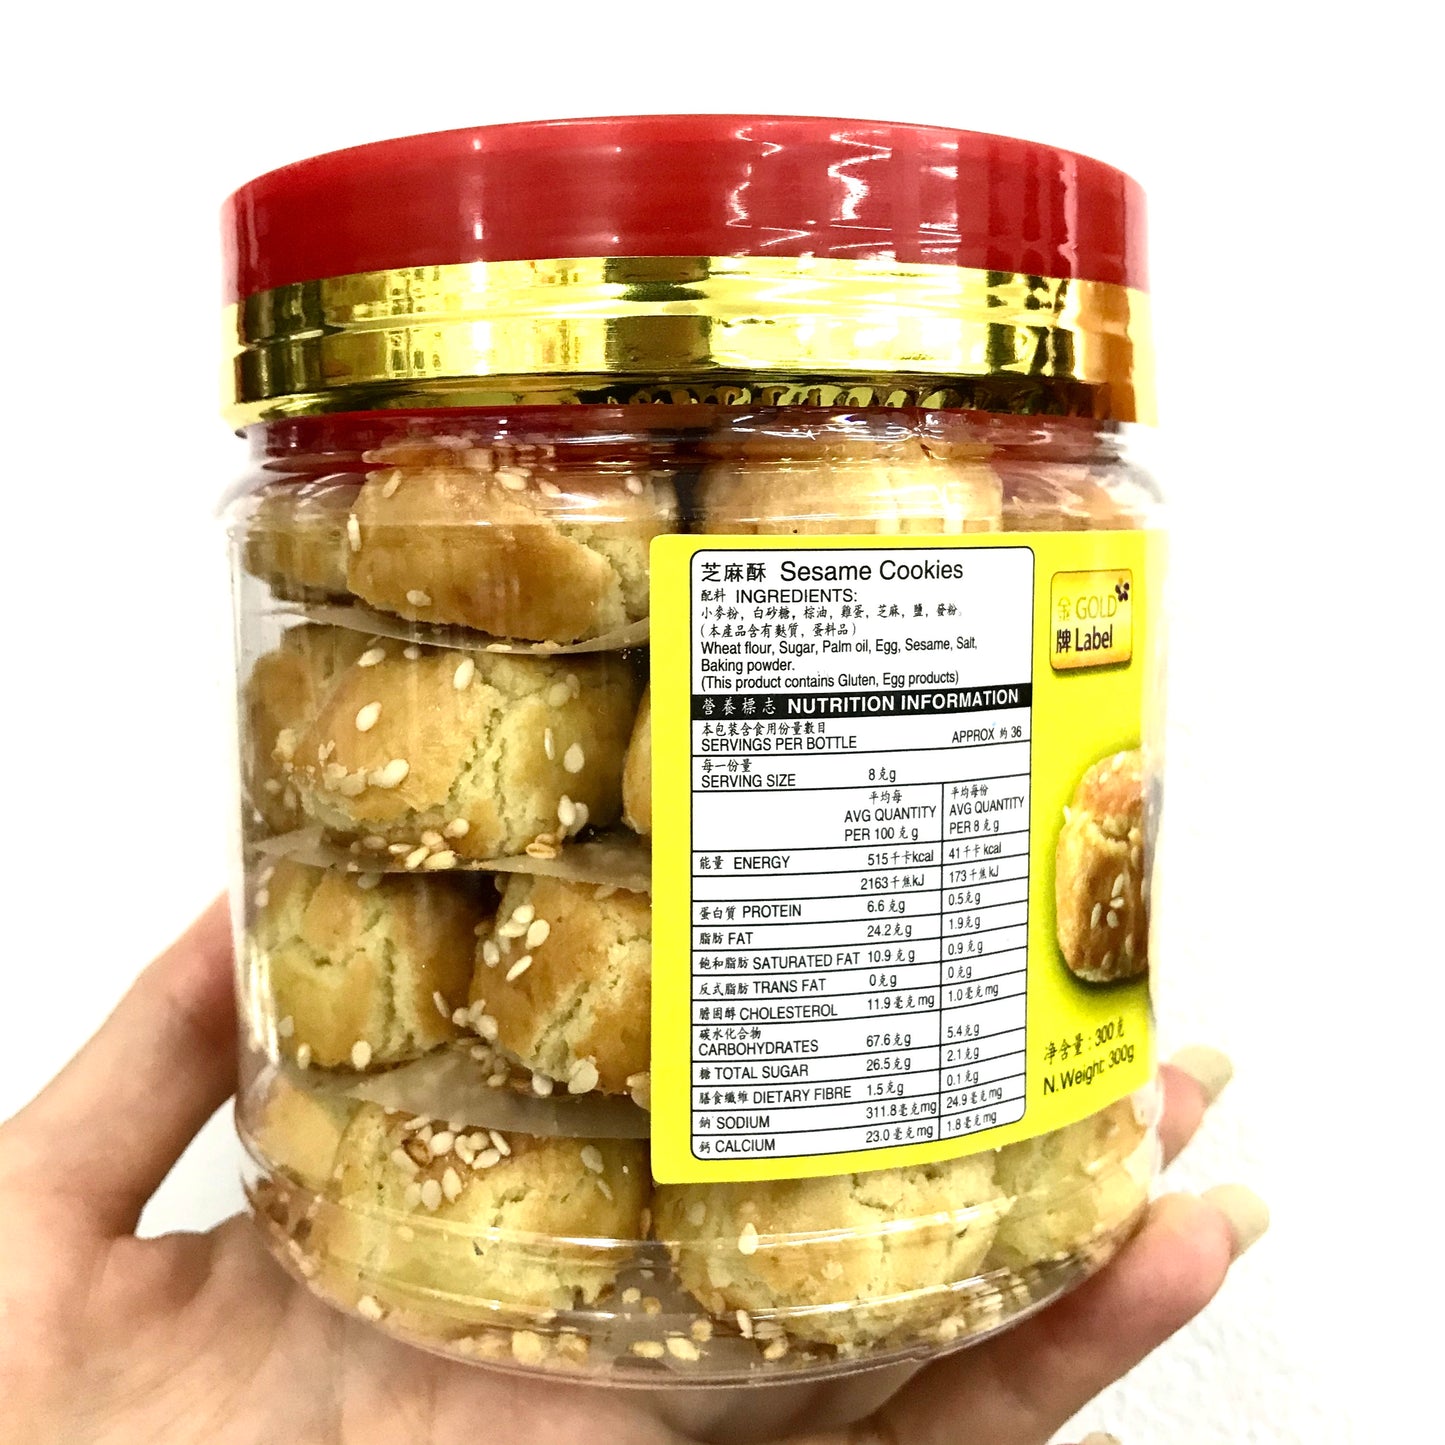 GOLD LABEL Baked Sesame Cookies 300g